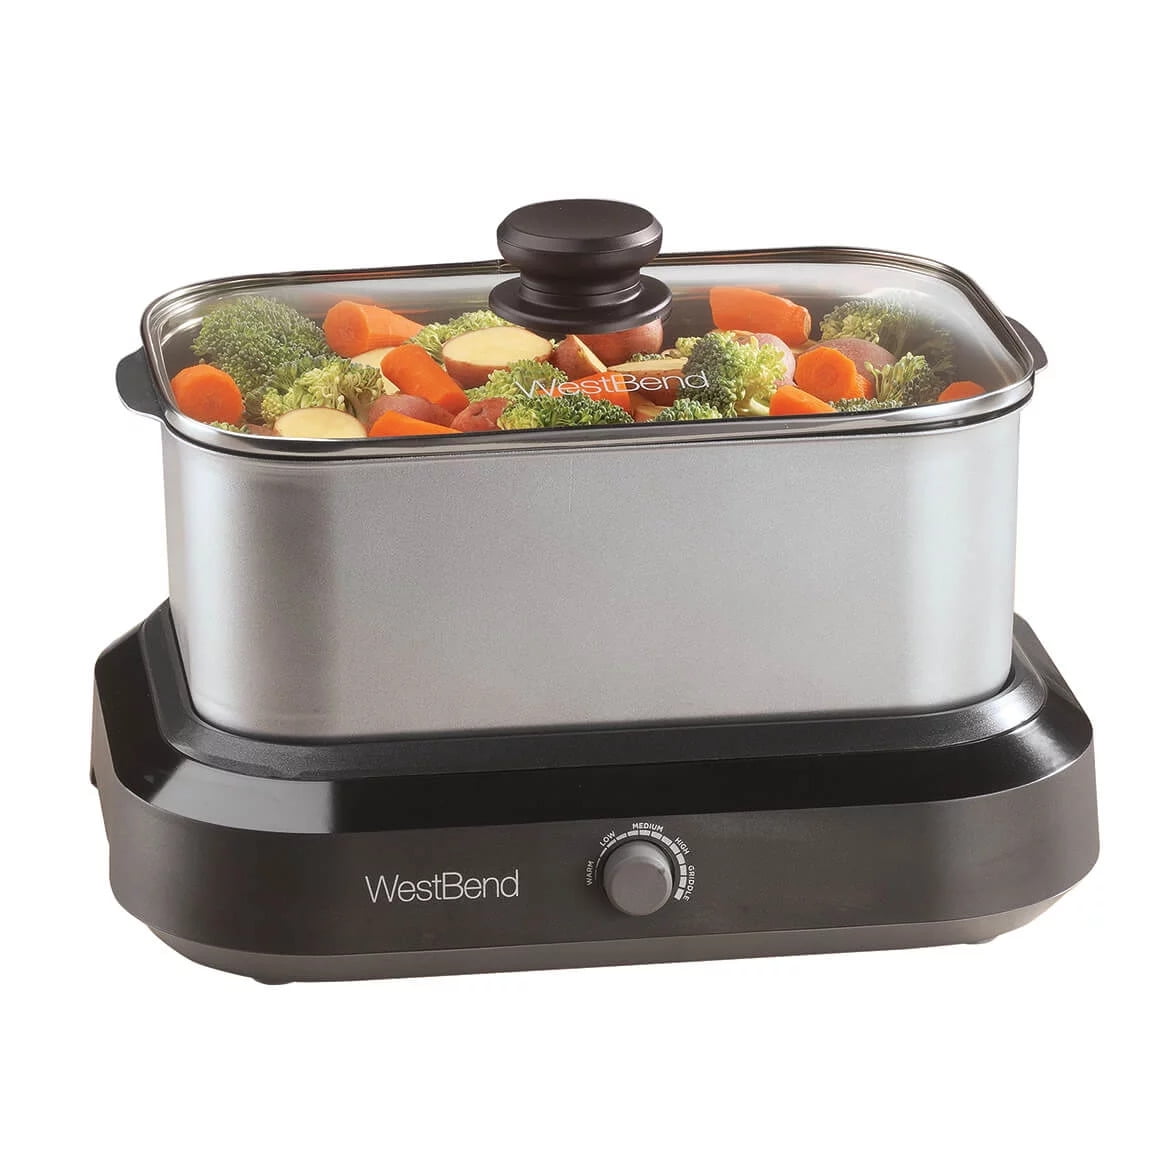 West Bend 87905 Slow Cooker Large Capacity Non-Stick Variable Temperature Control Includes Travel Lid and Thermal Carrying CA